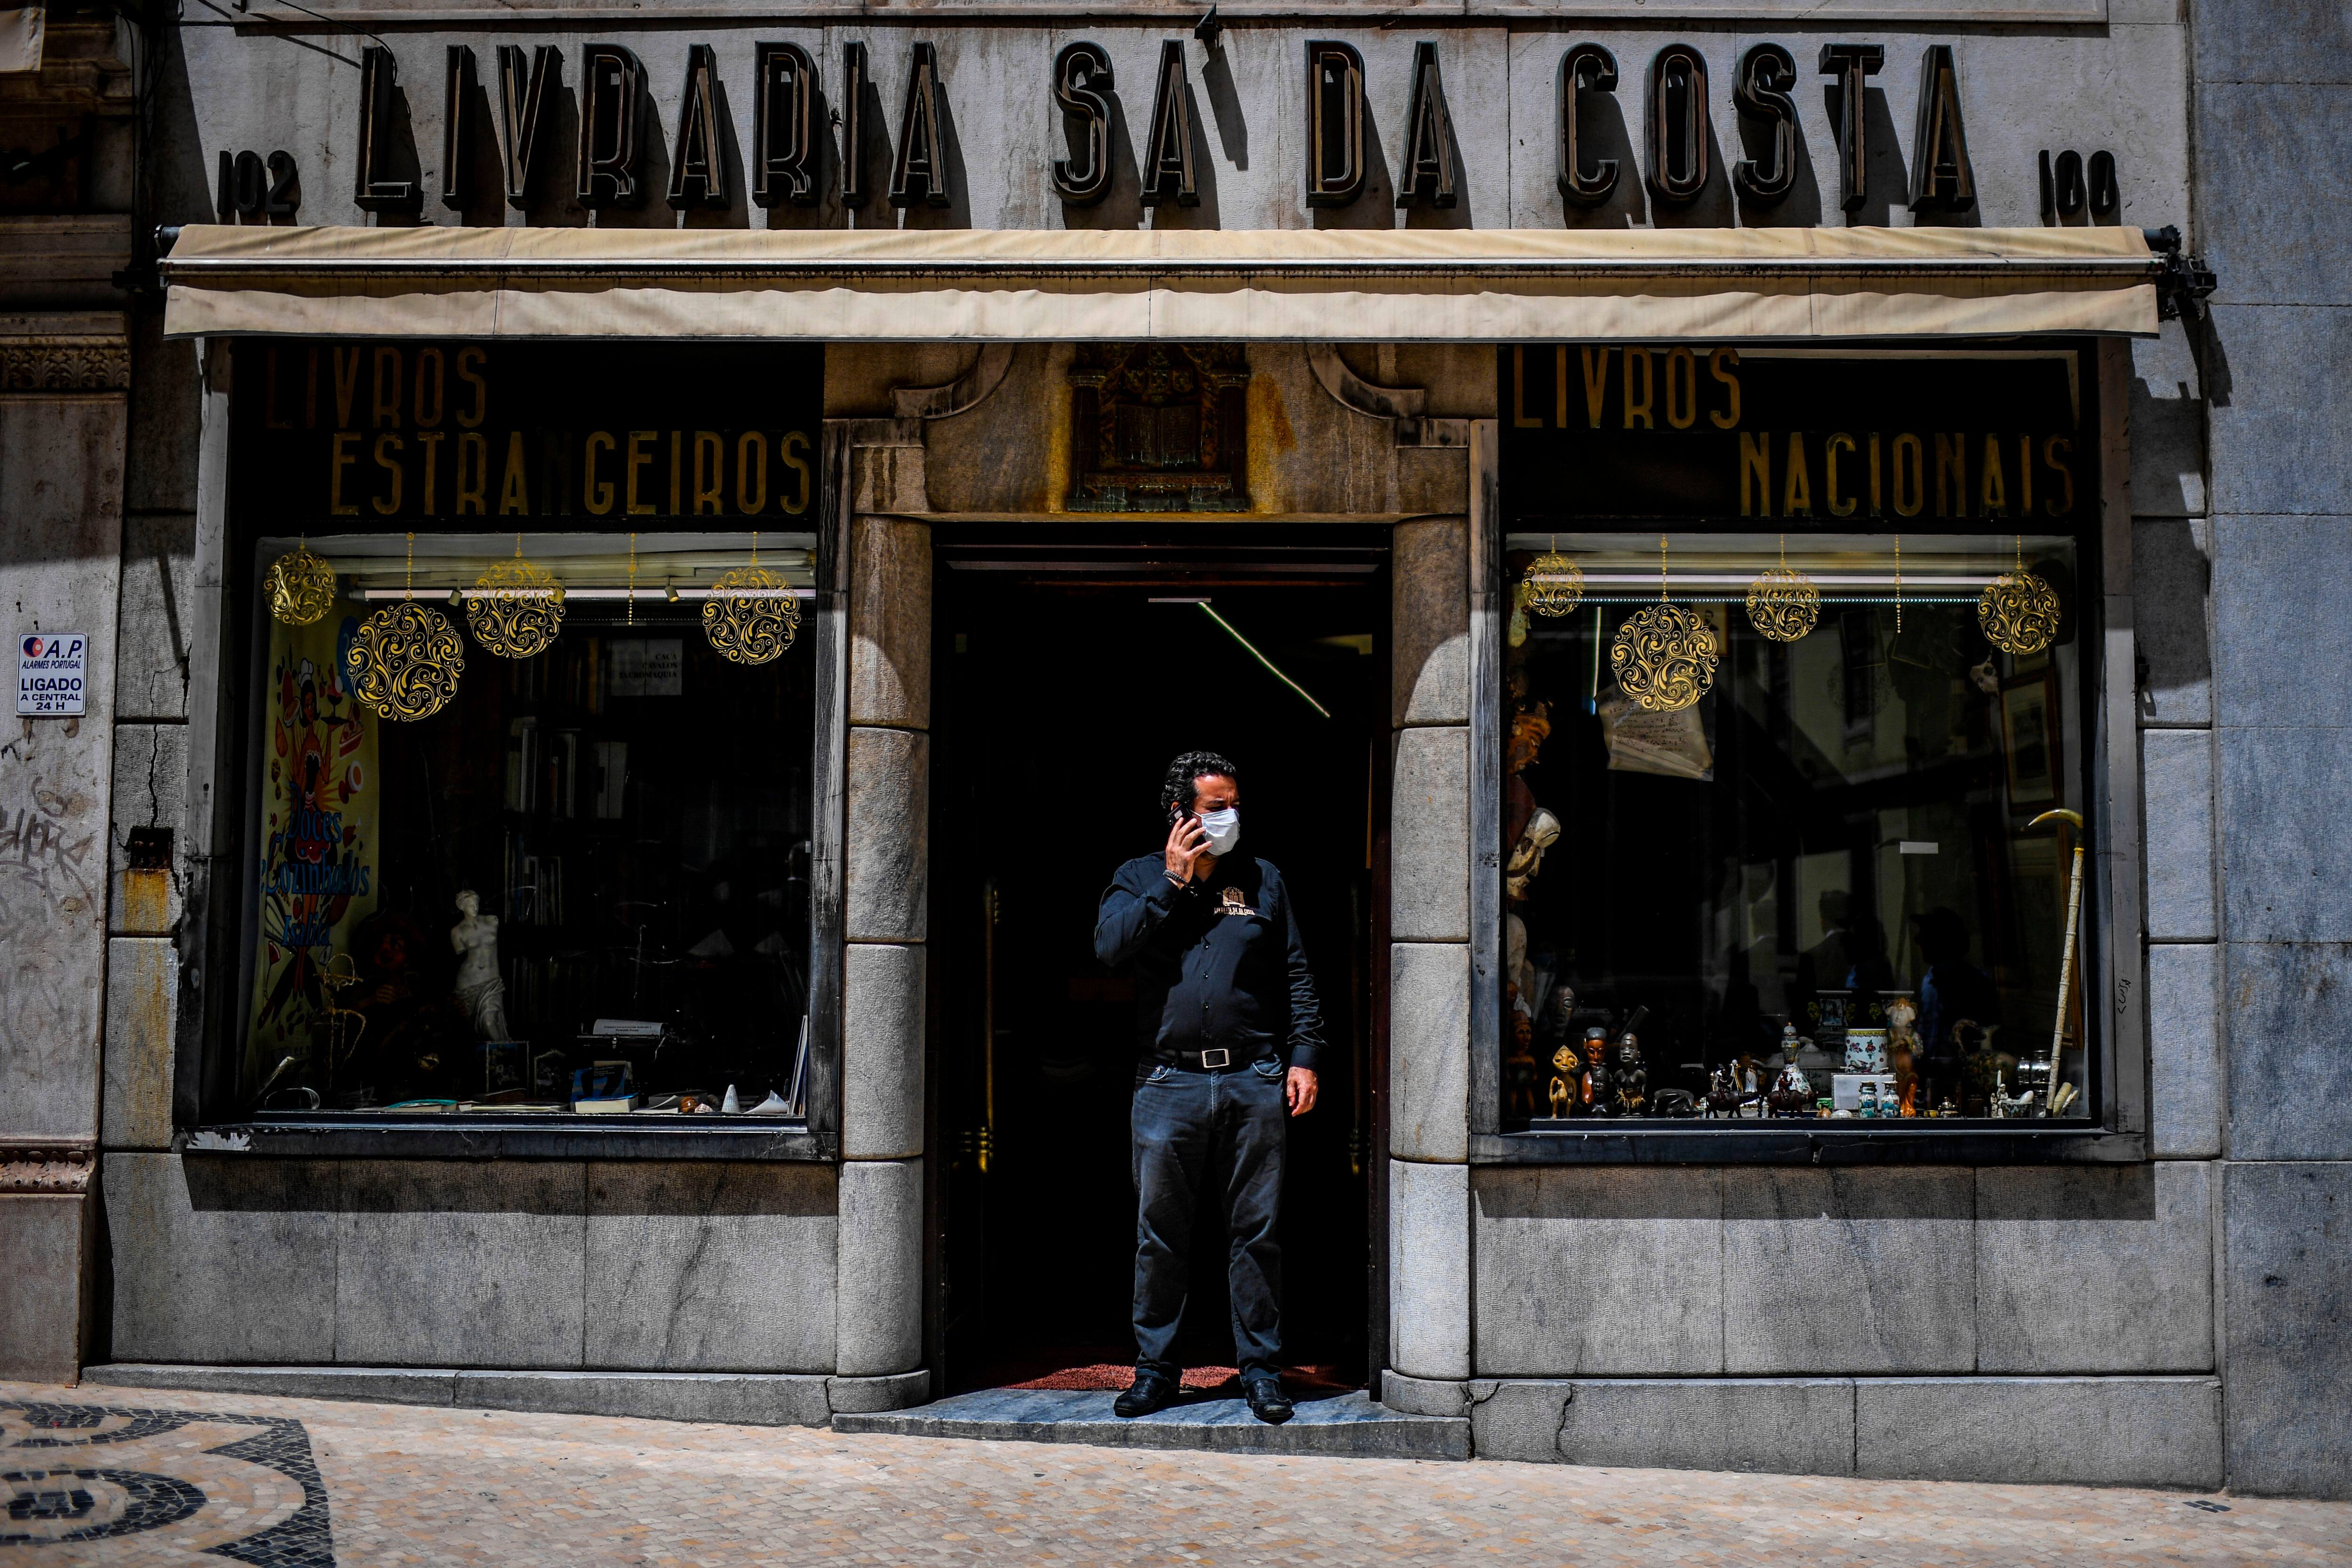 A man speaks on the phone in front of his bookshop in Lisbon on May 4, 2020 as millions of Europeans emerged with relief from coronavirus confinement. - Portugal allowed small shops, hair salons and car dealers to resume business, but ordered face masks to be worn in stores and on public transport. (Photo by PATRICIA DE MELO MOREIRA / AFP) (Photo by PATRICIA DE MELO MOREIRA/AFP via Getty Images)